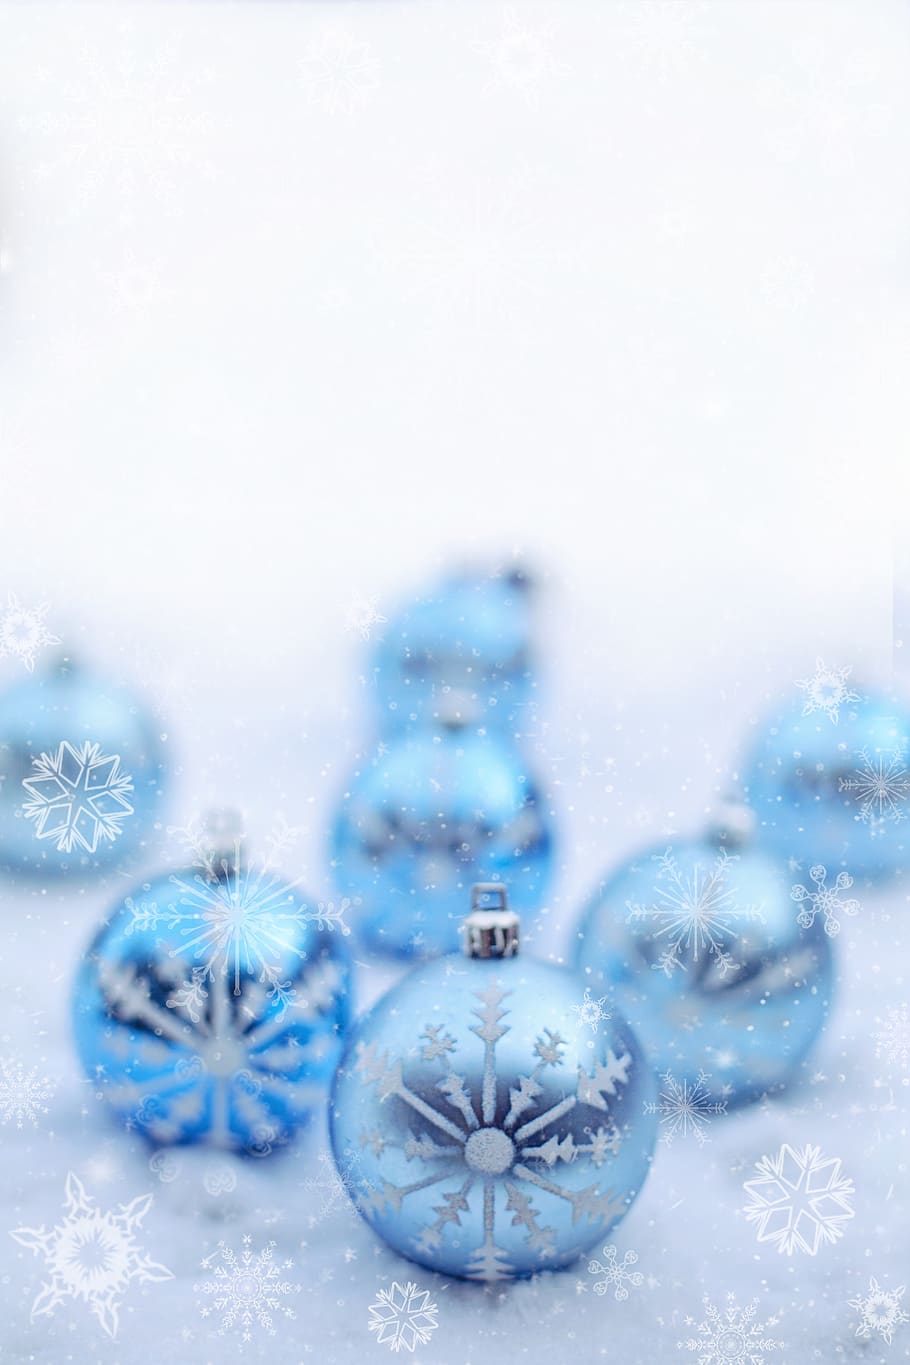 snow, snowing, ornaments, pale blue, light blue, winter, cold, nature, snowfall, snowflakes